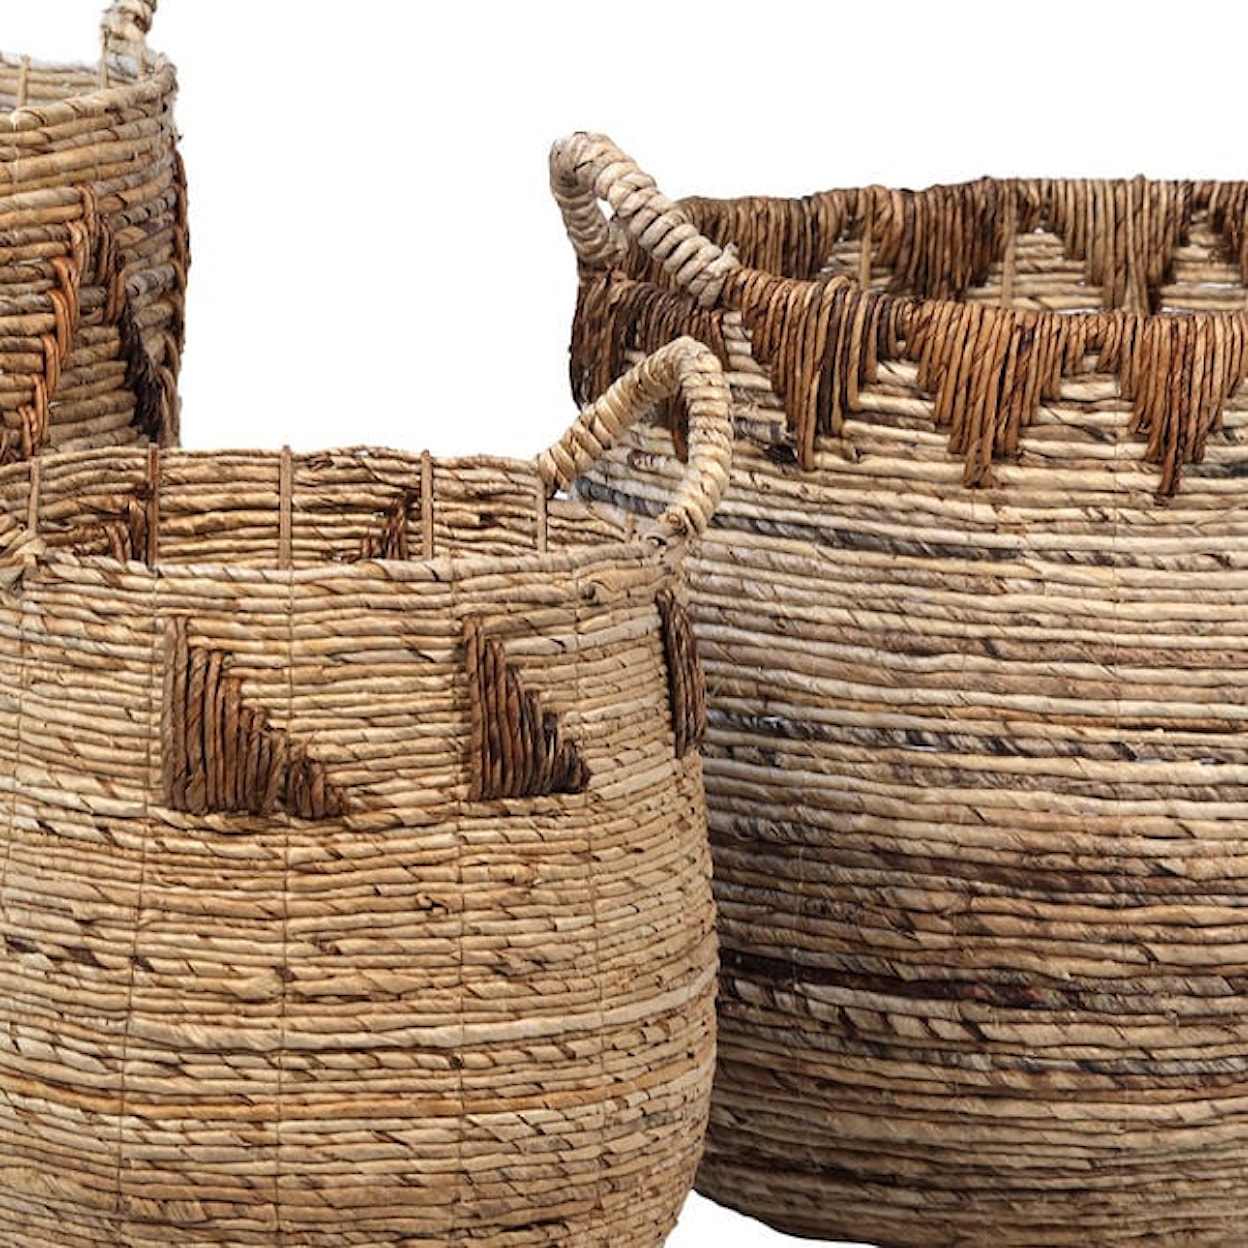 Dovetail Furniture Accessories Moana Basket Set Of 3